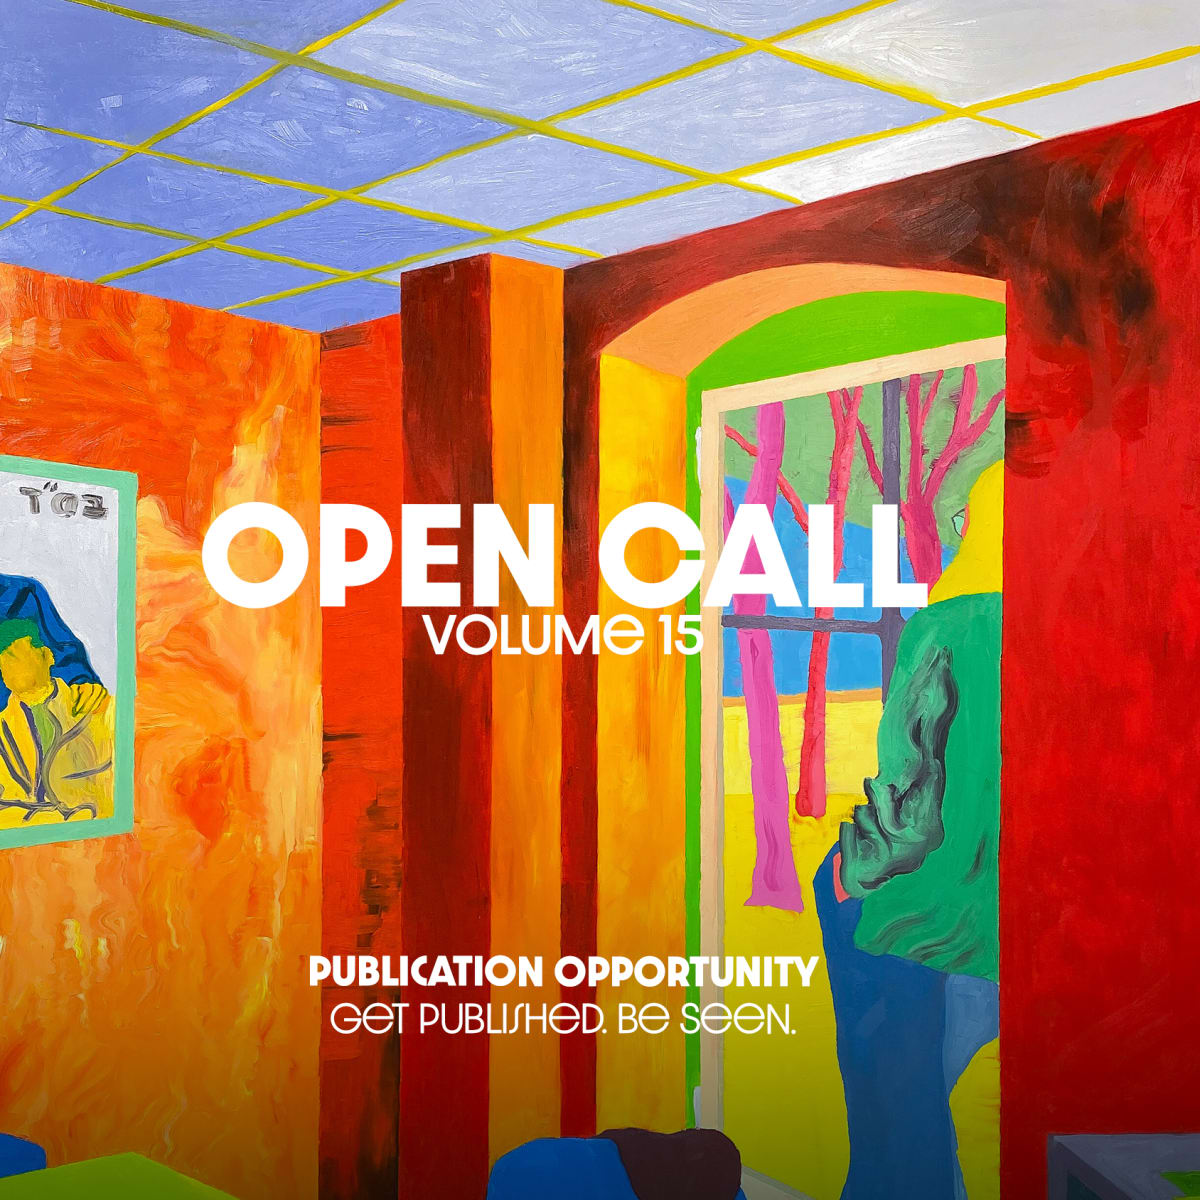 Publication Opportunity for Emerging Artists in Volume 15